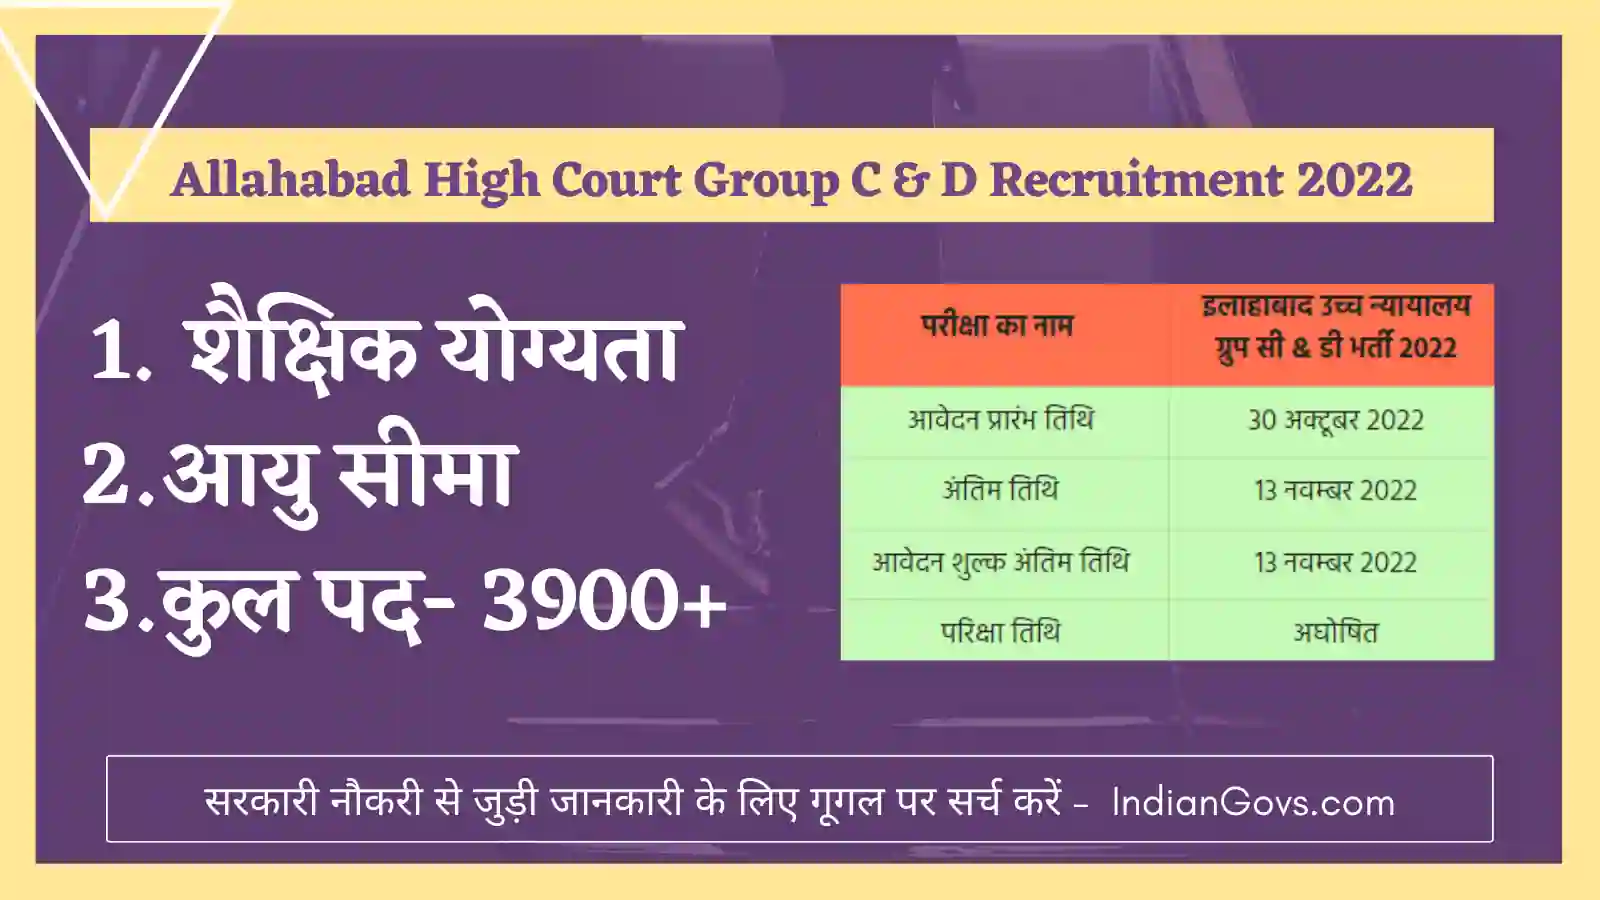 Allahabad High Court Group C and D Recruitment 2022